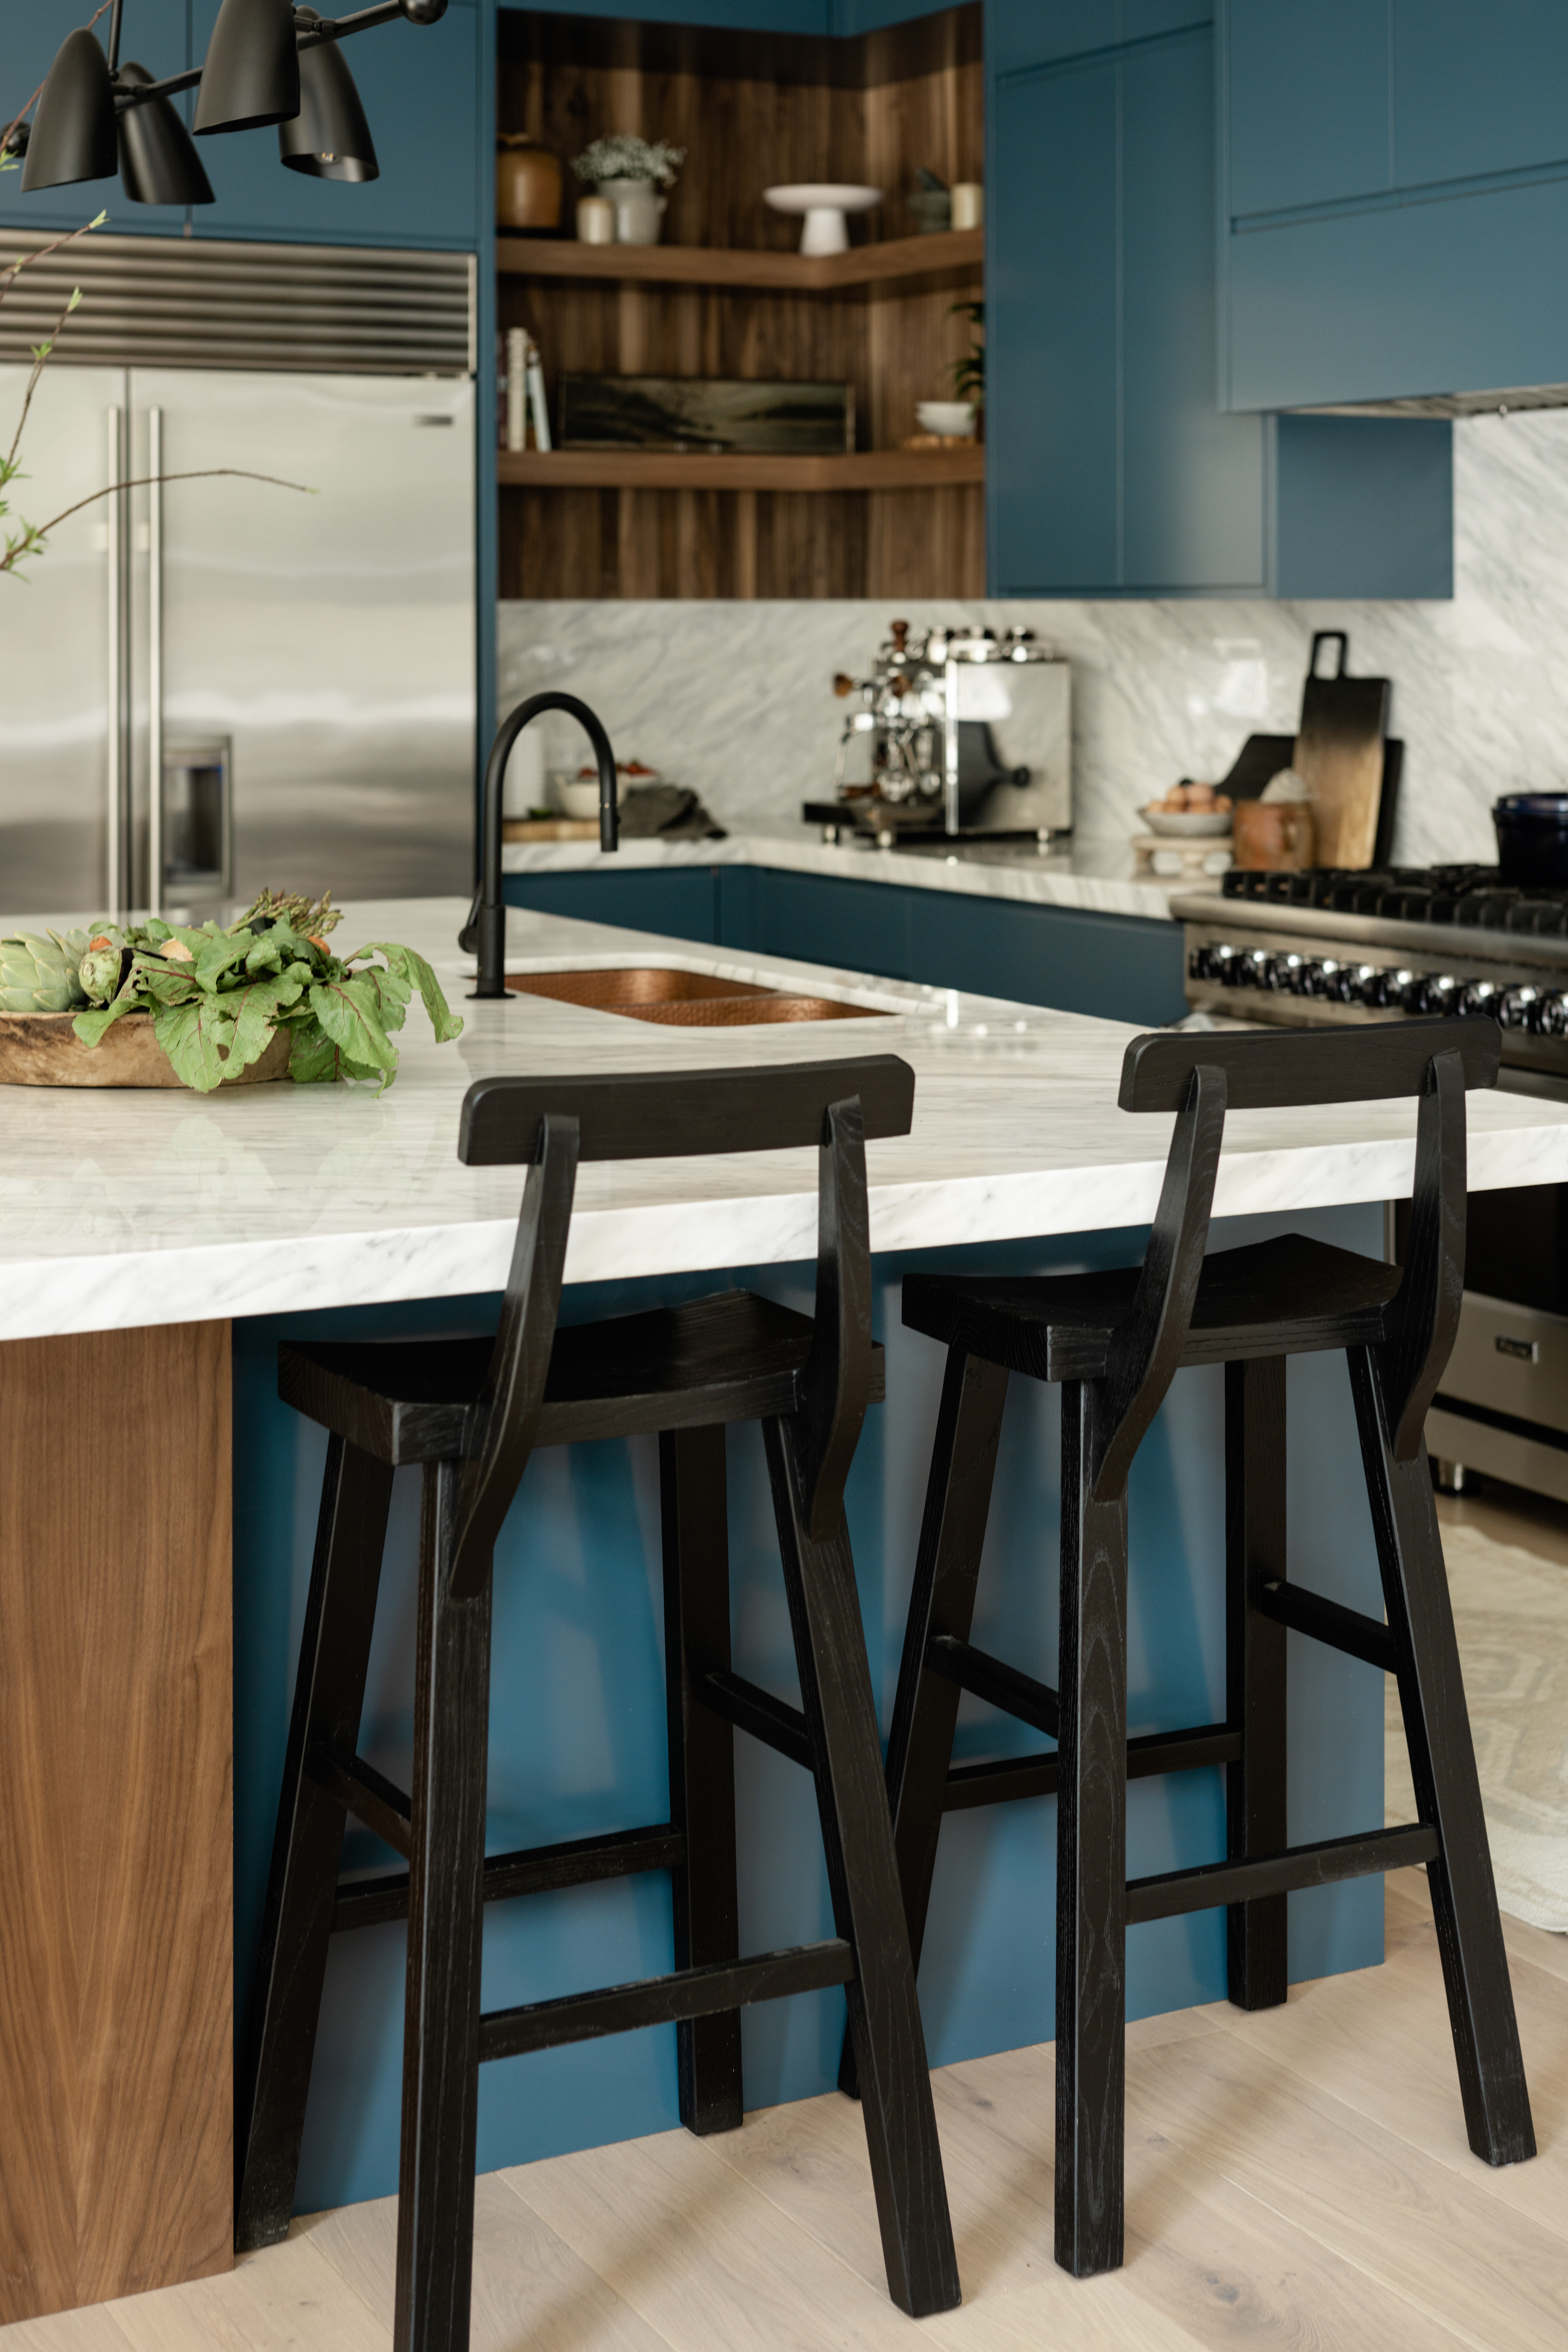 Kitchen Barstools with Blue Accents